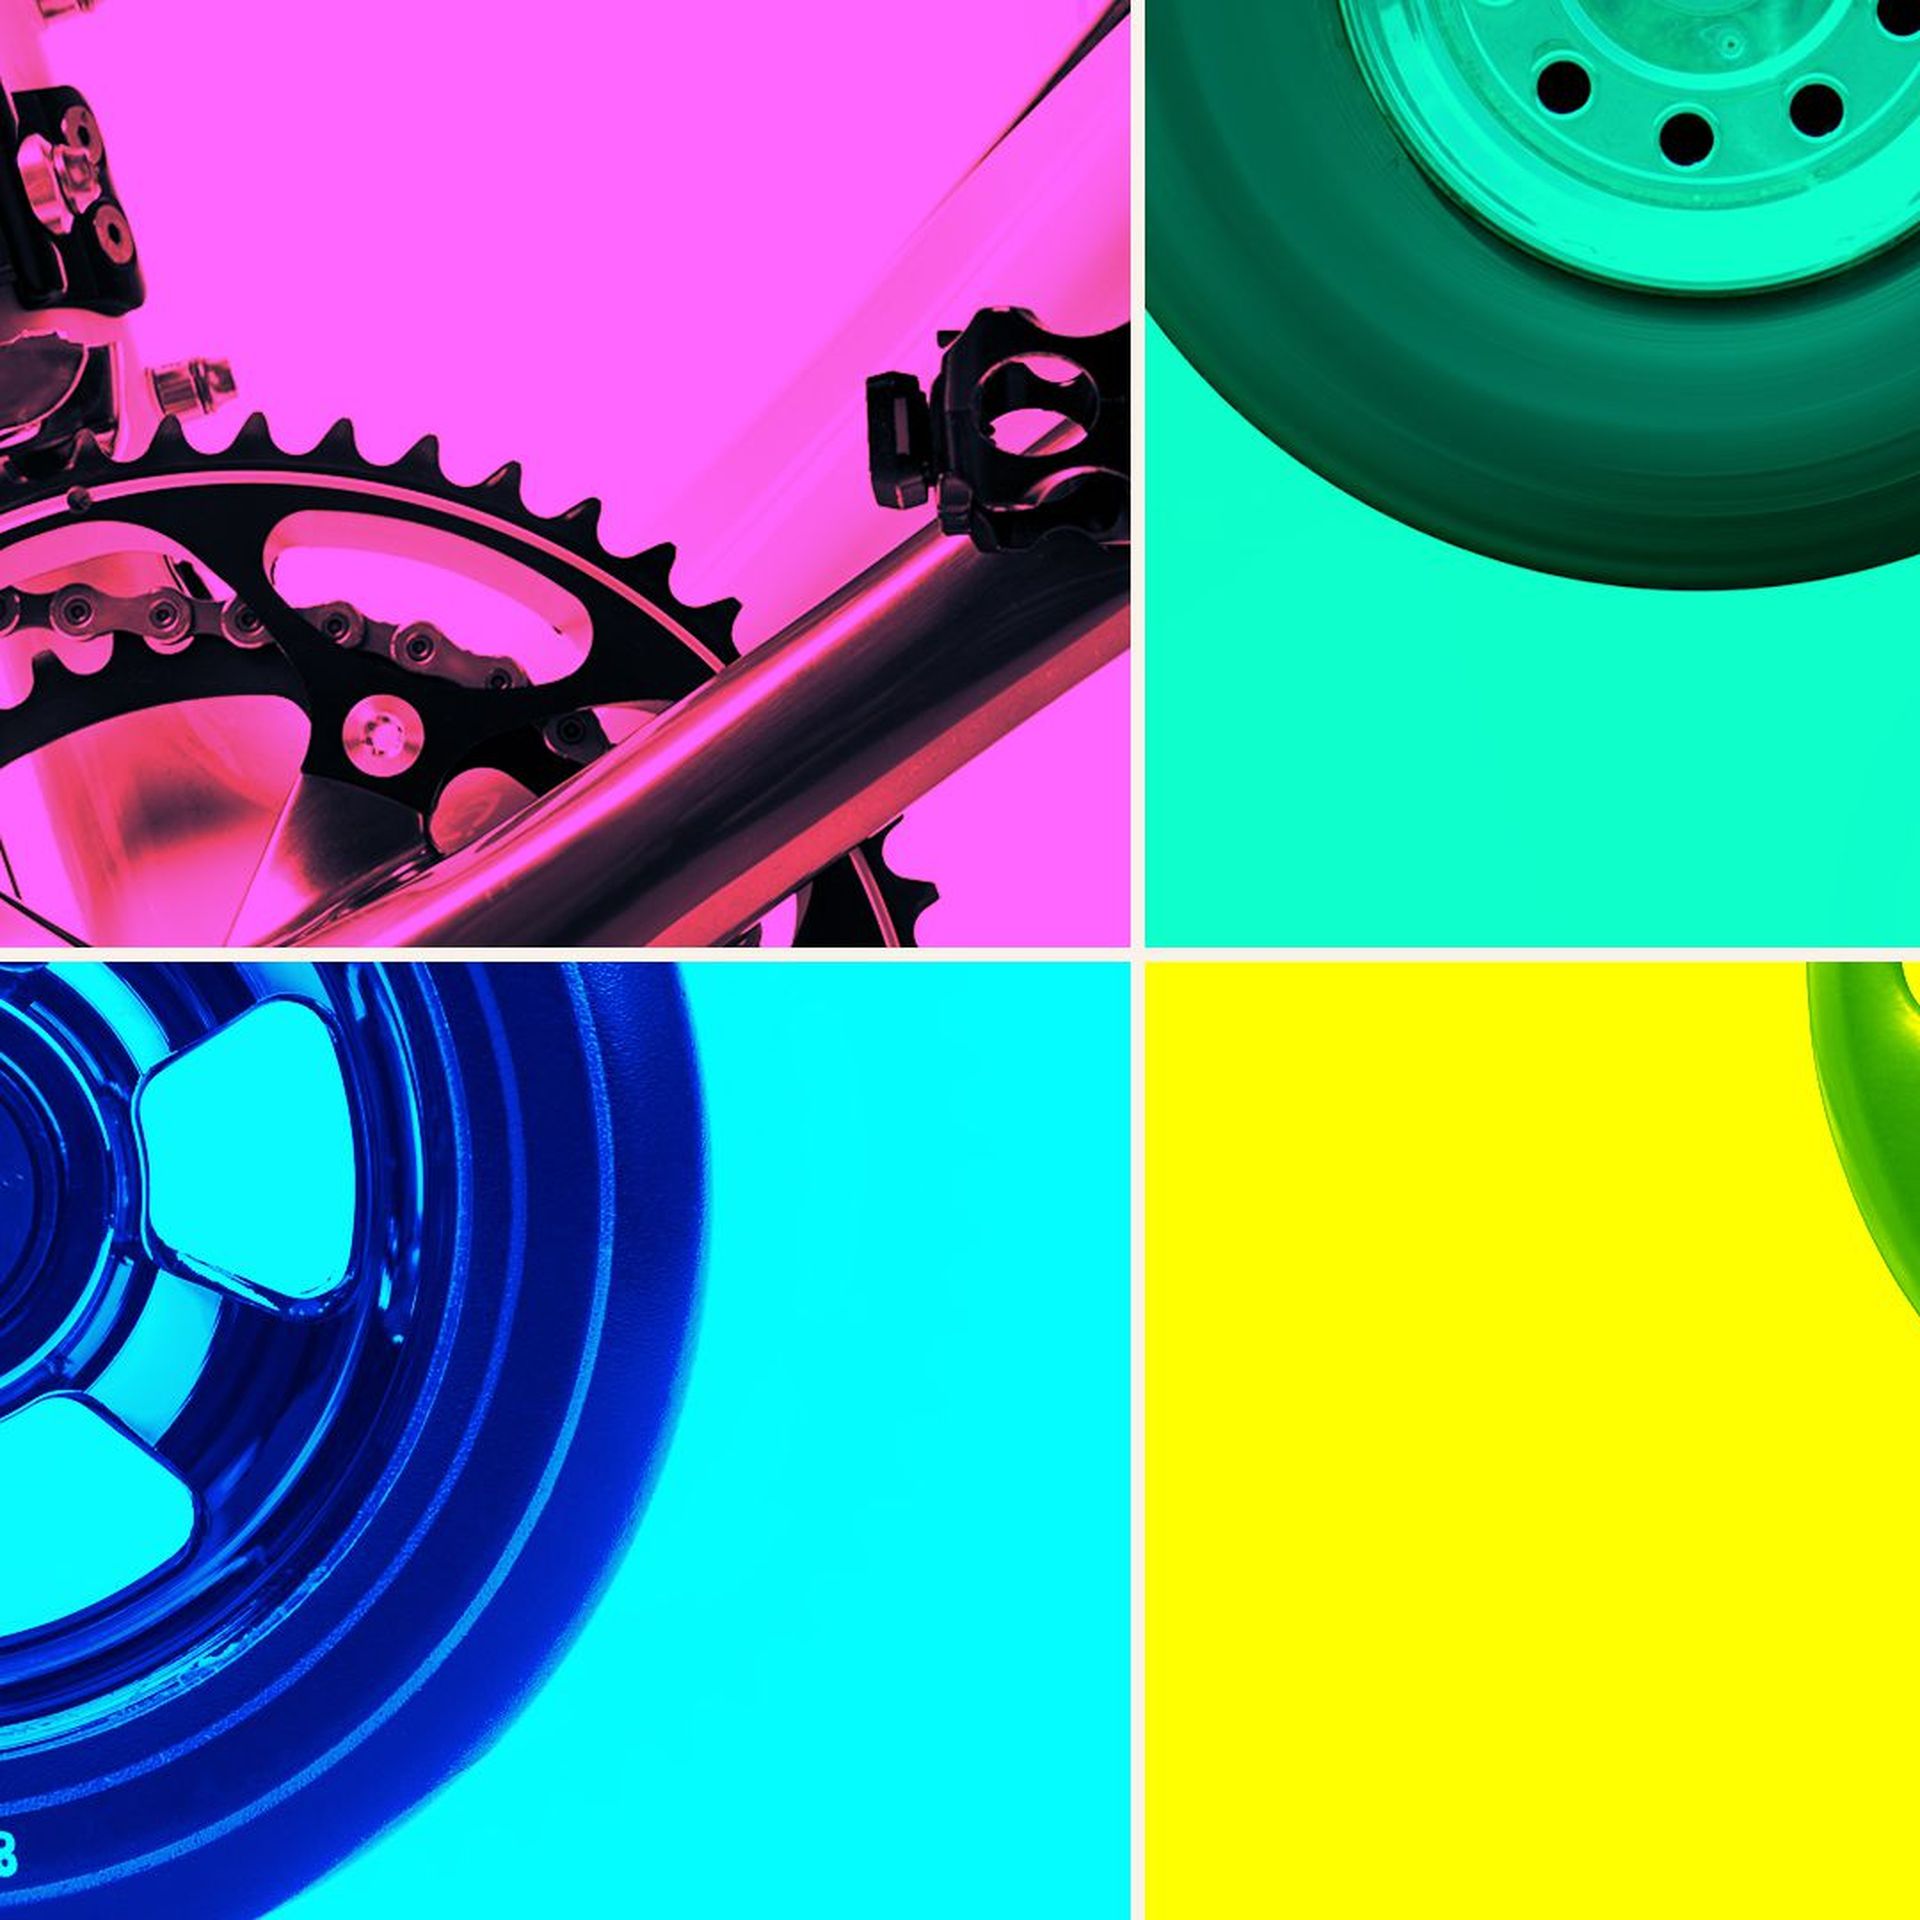 Illustration of various types of wheels on a grid pattern